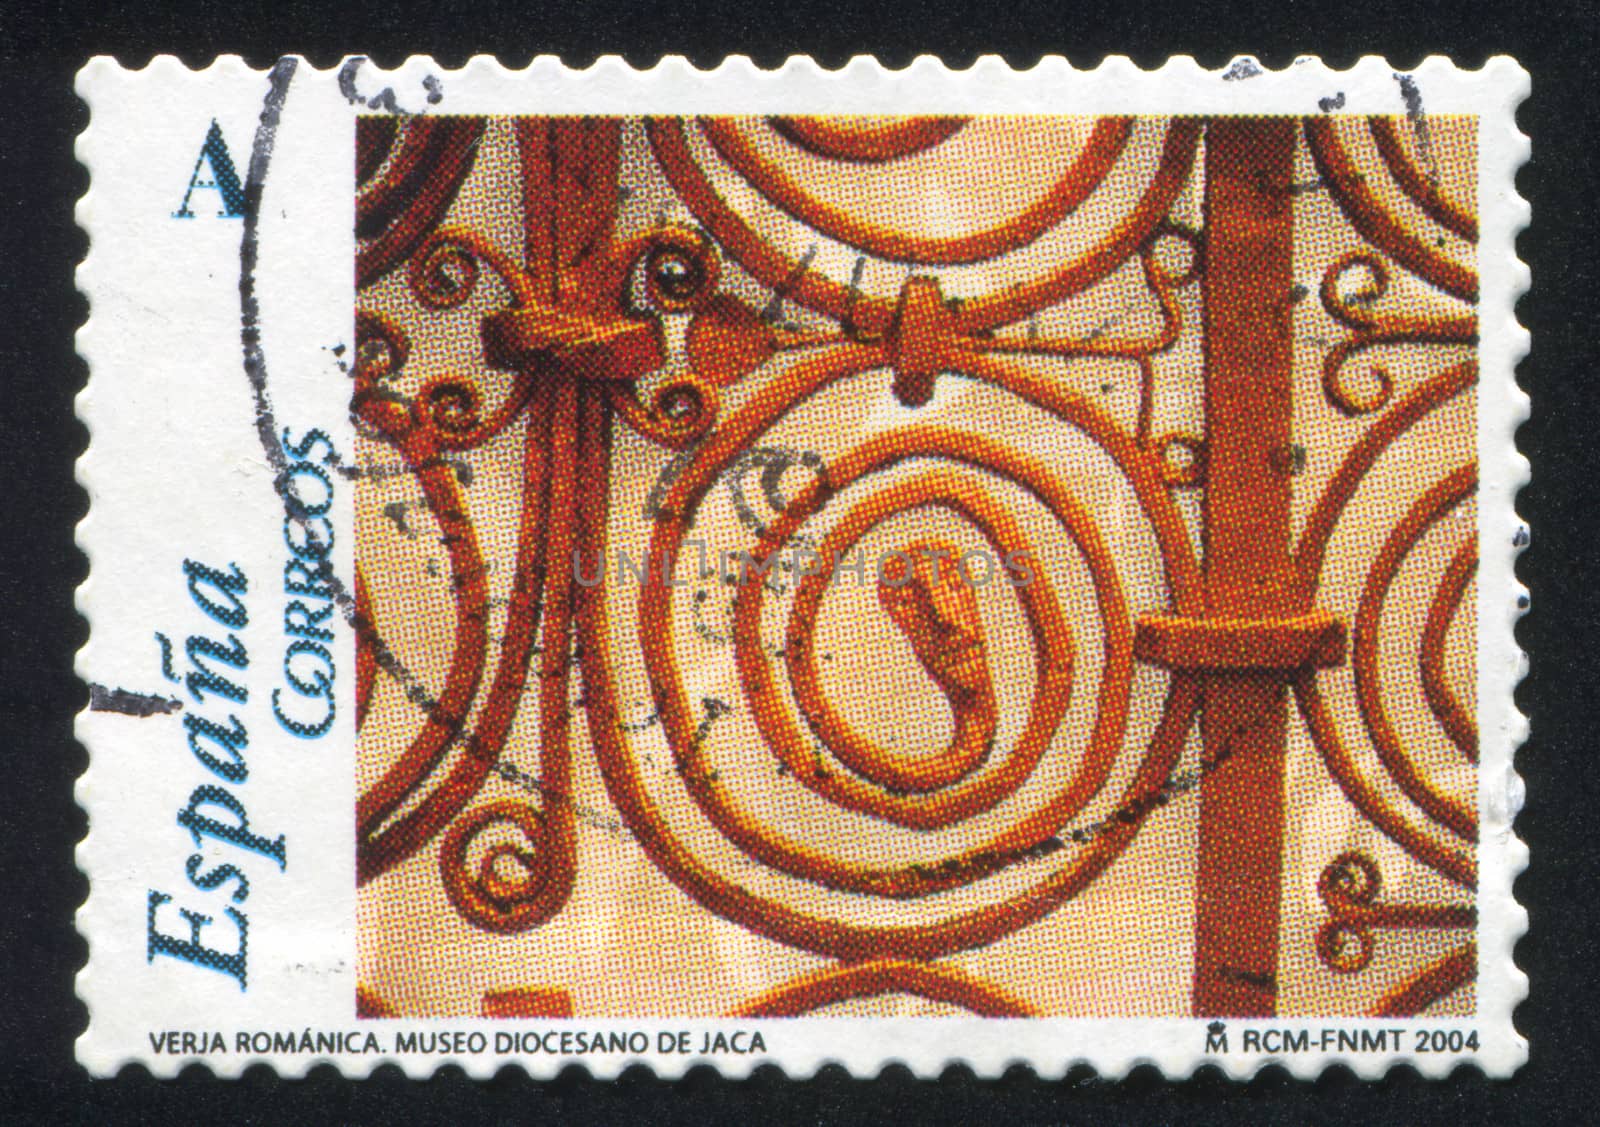 SPAIN - CIRCA 2004: stamp printed by Spain, shows Wooden carved crucifix, Diocesan Museum, Jaca, circa 2004